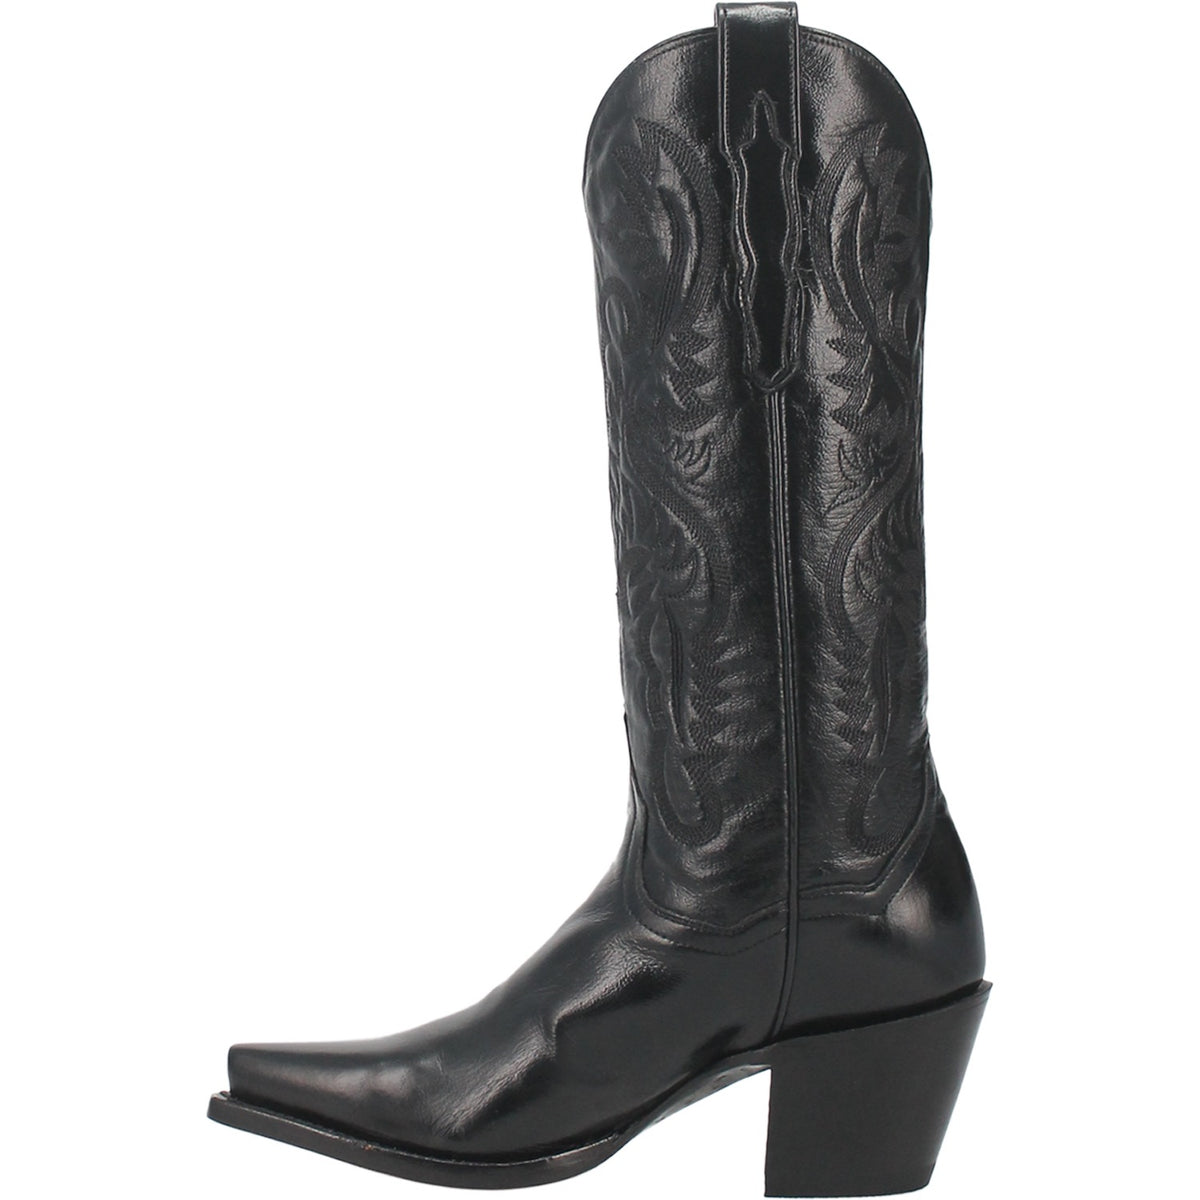 MARIA LEATHER BOOT Cover